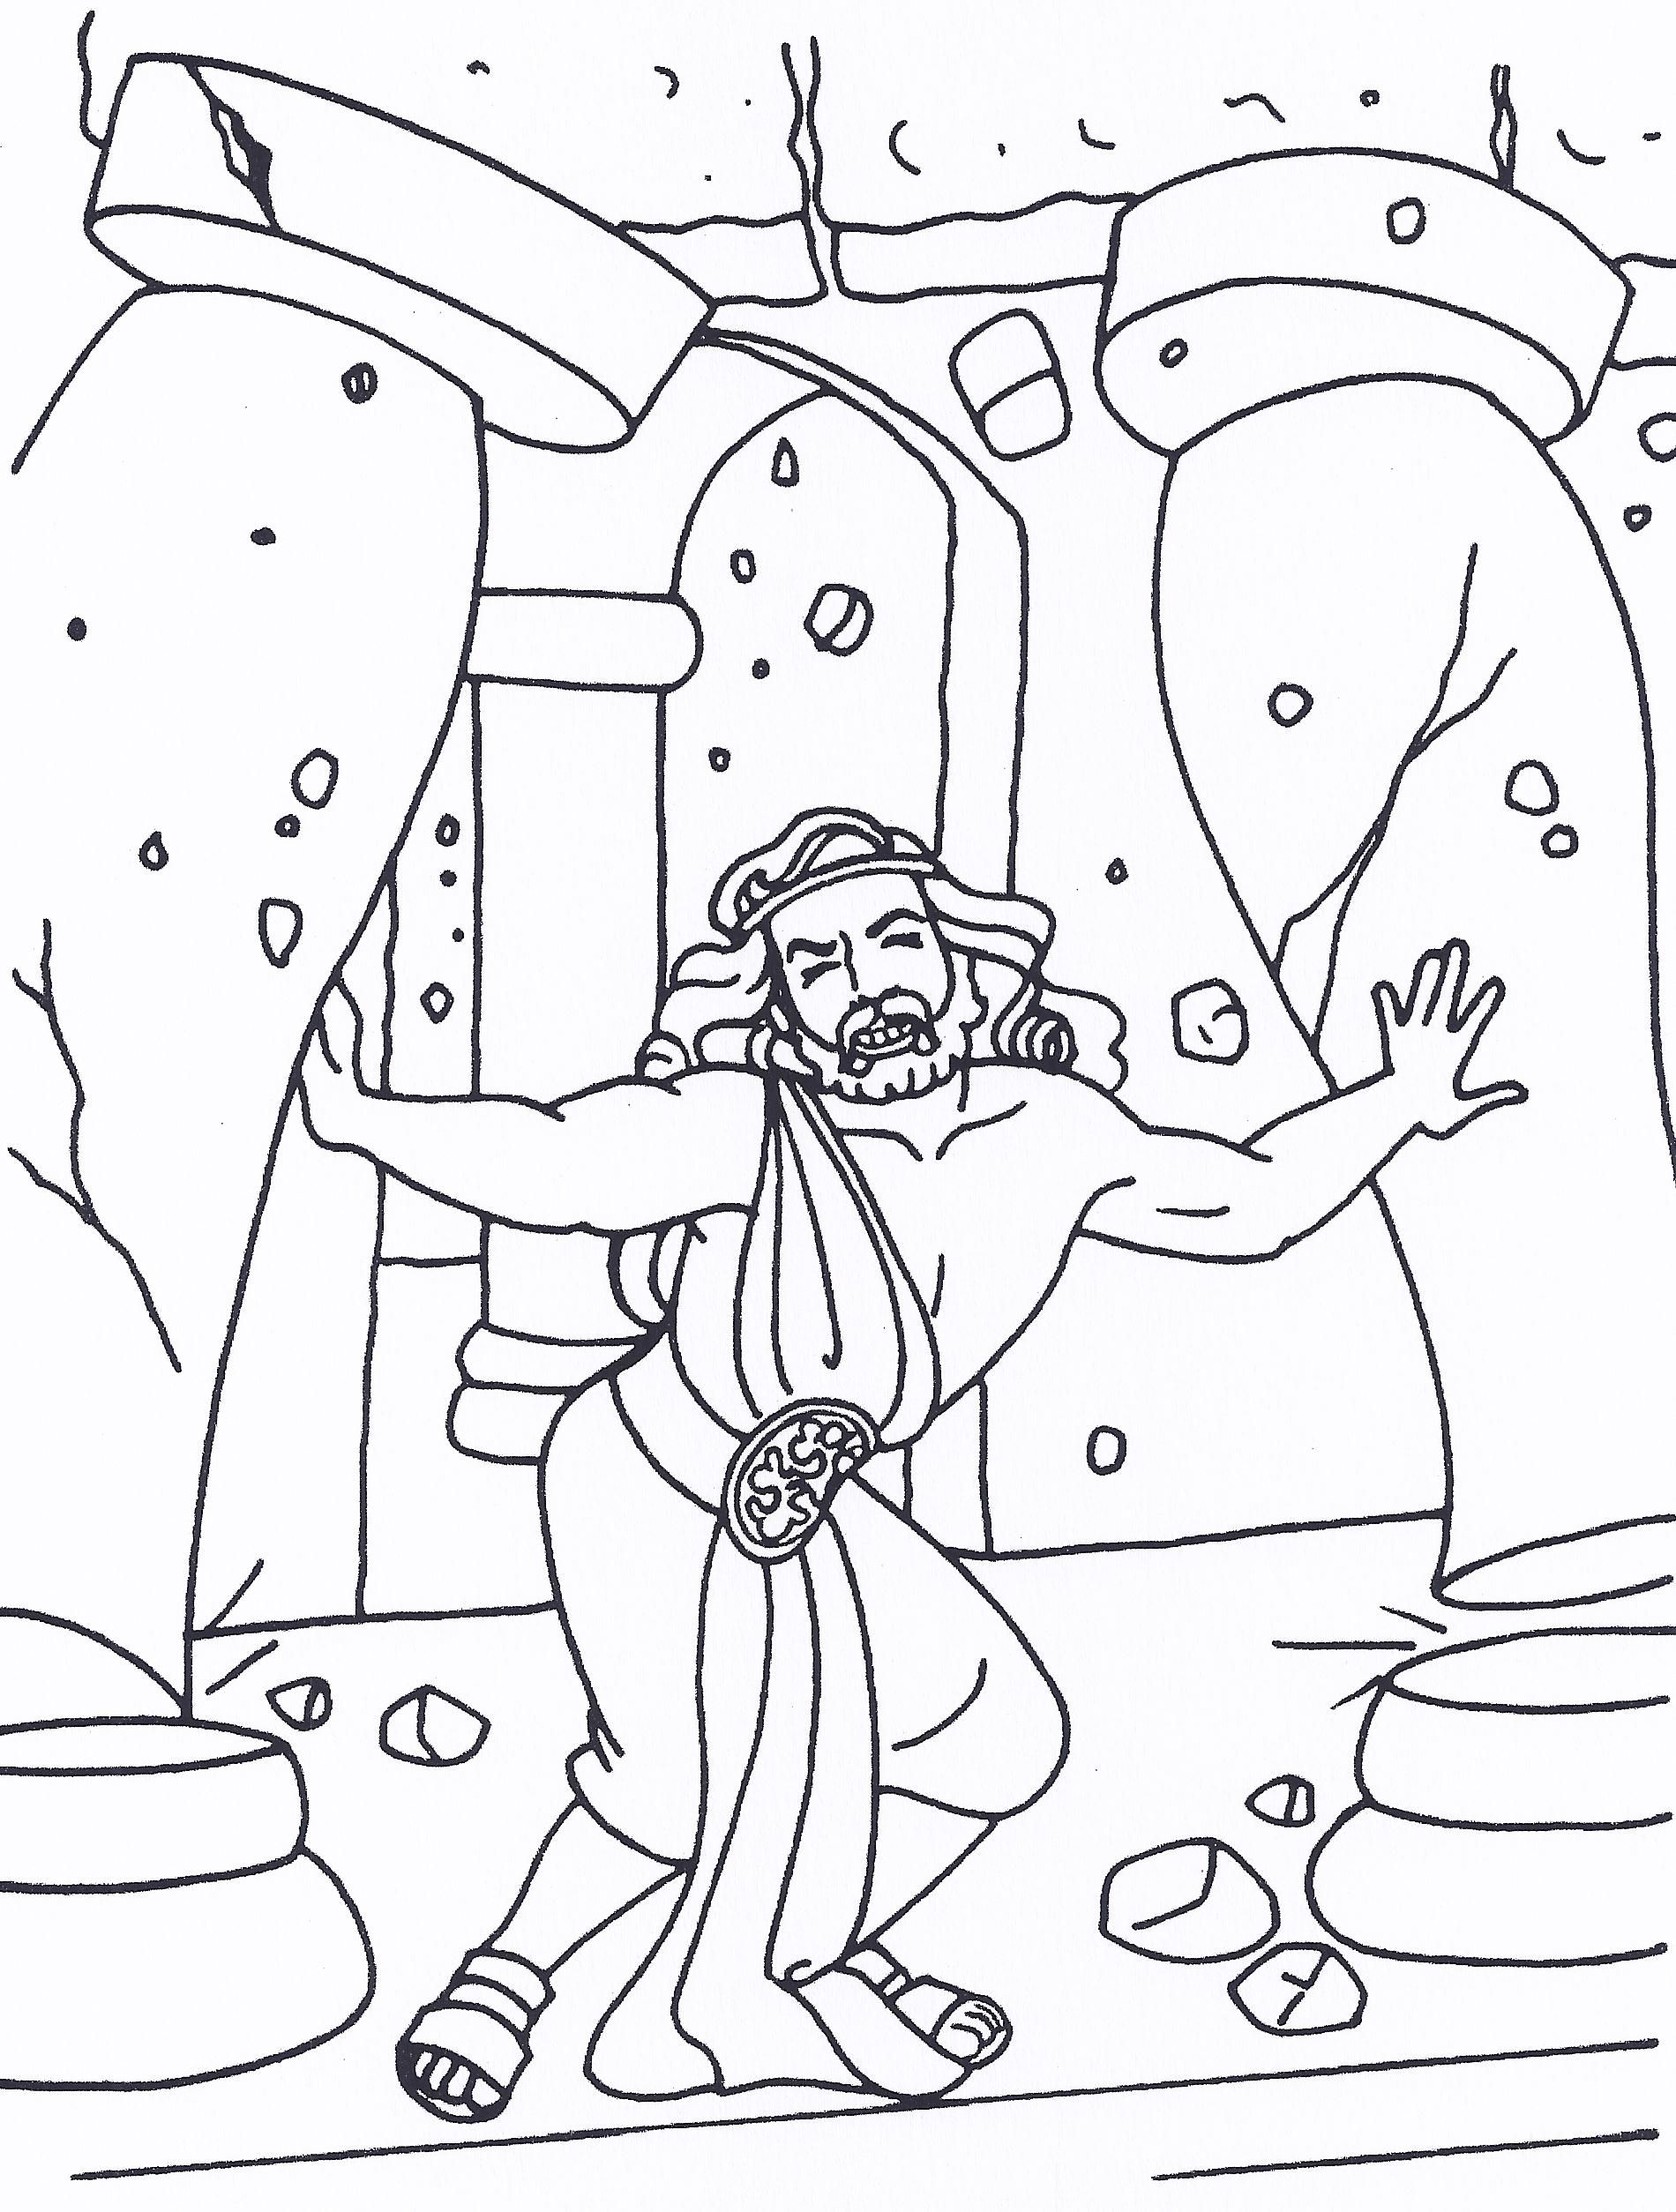 Samson Bible Coloring Pages at GetColorings.com | Free ...